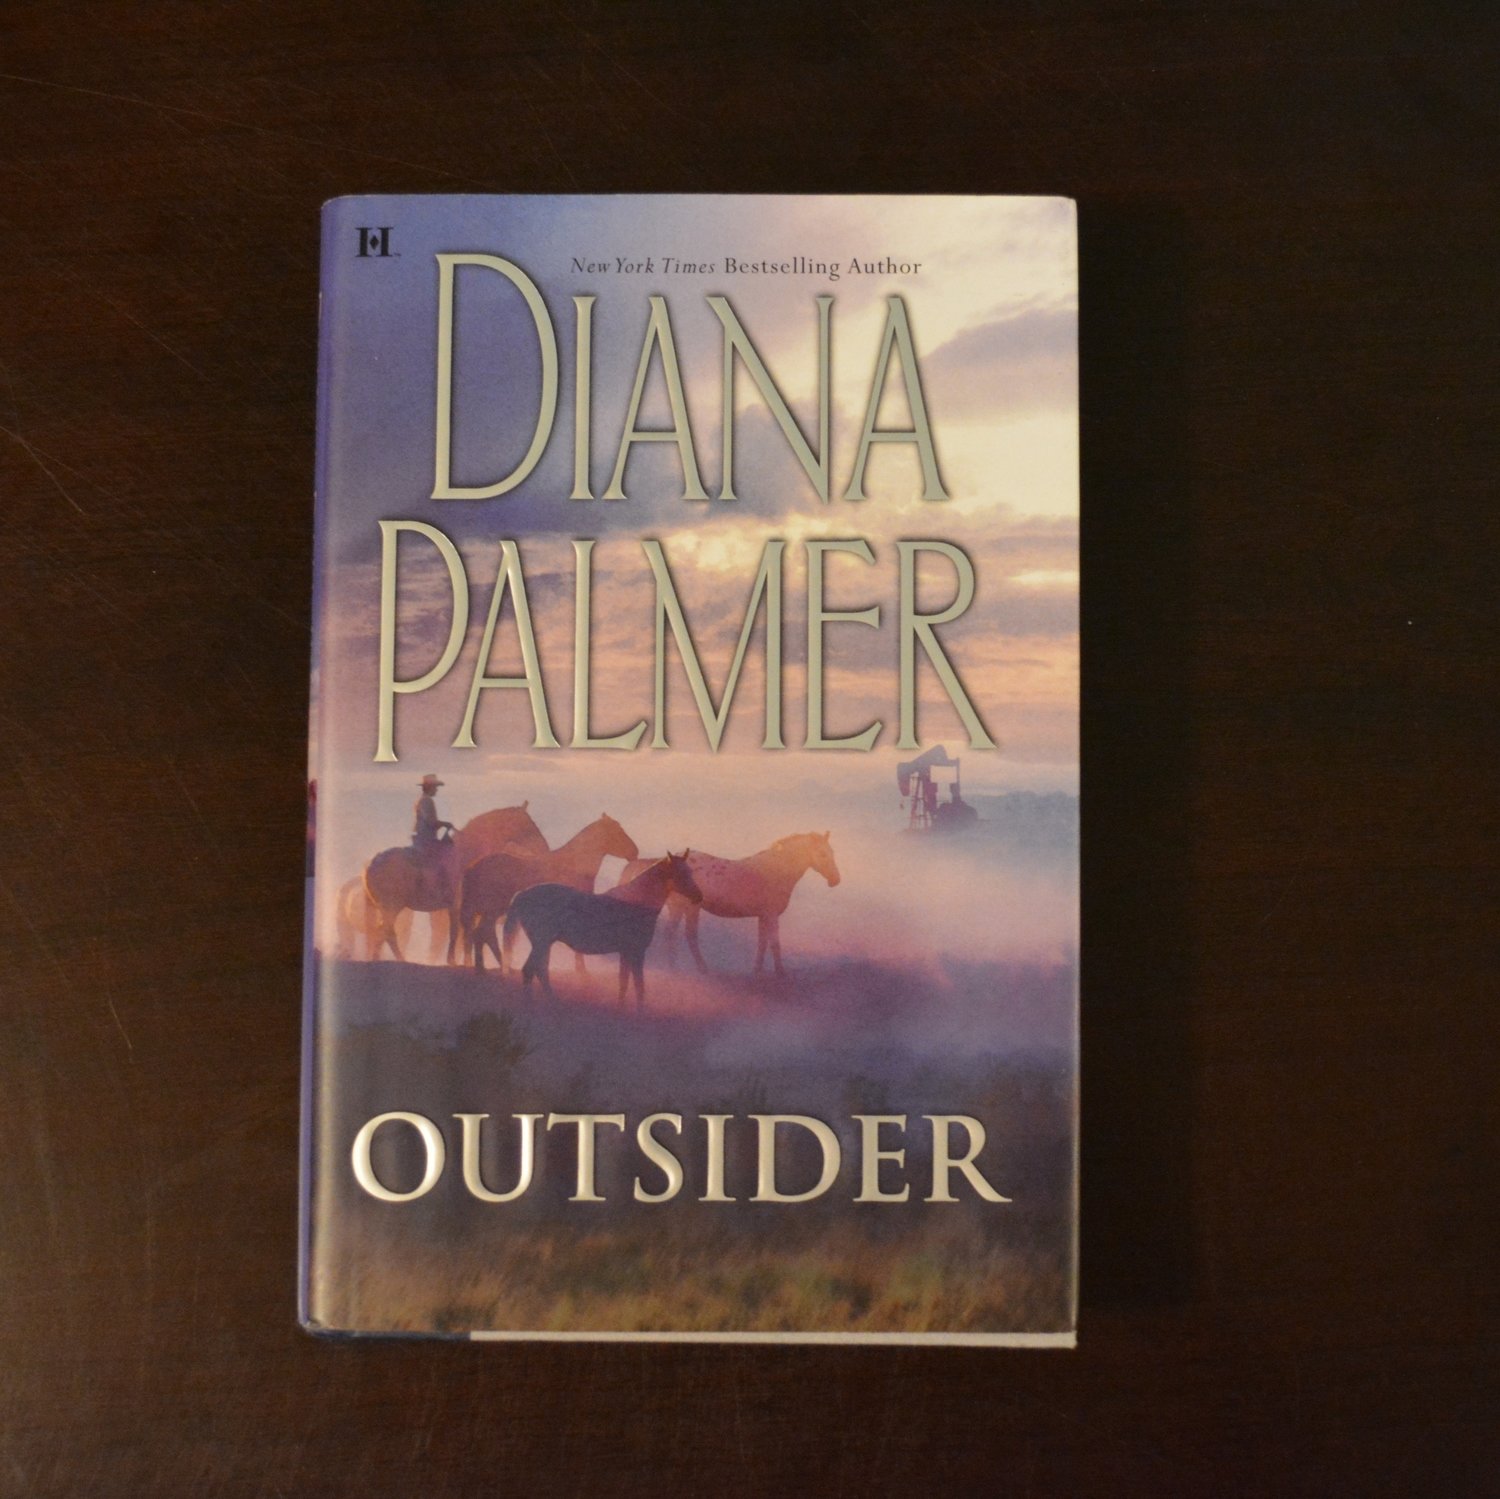 Outsider by Diana Palmer